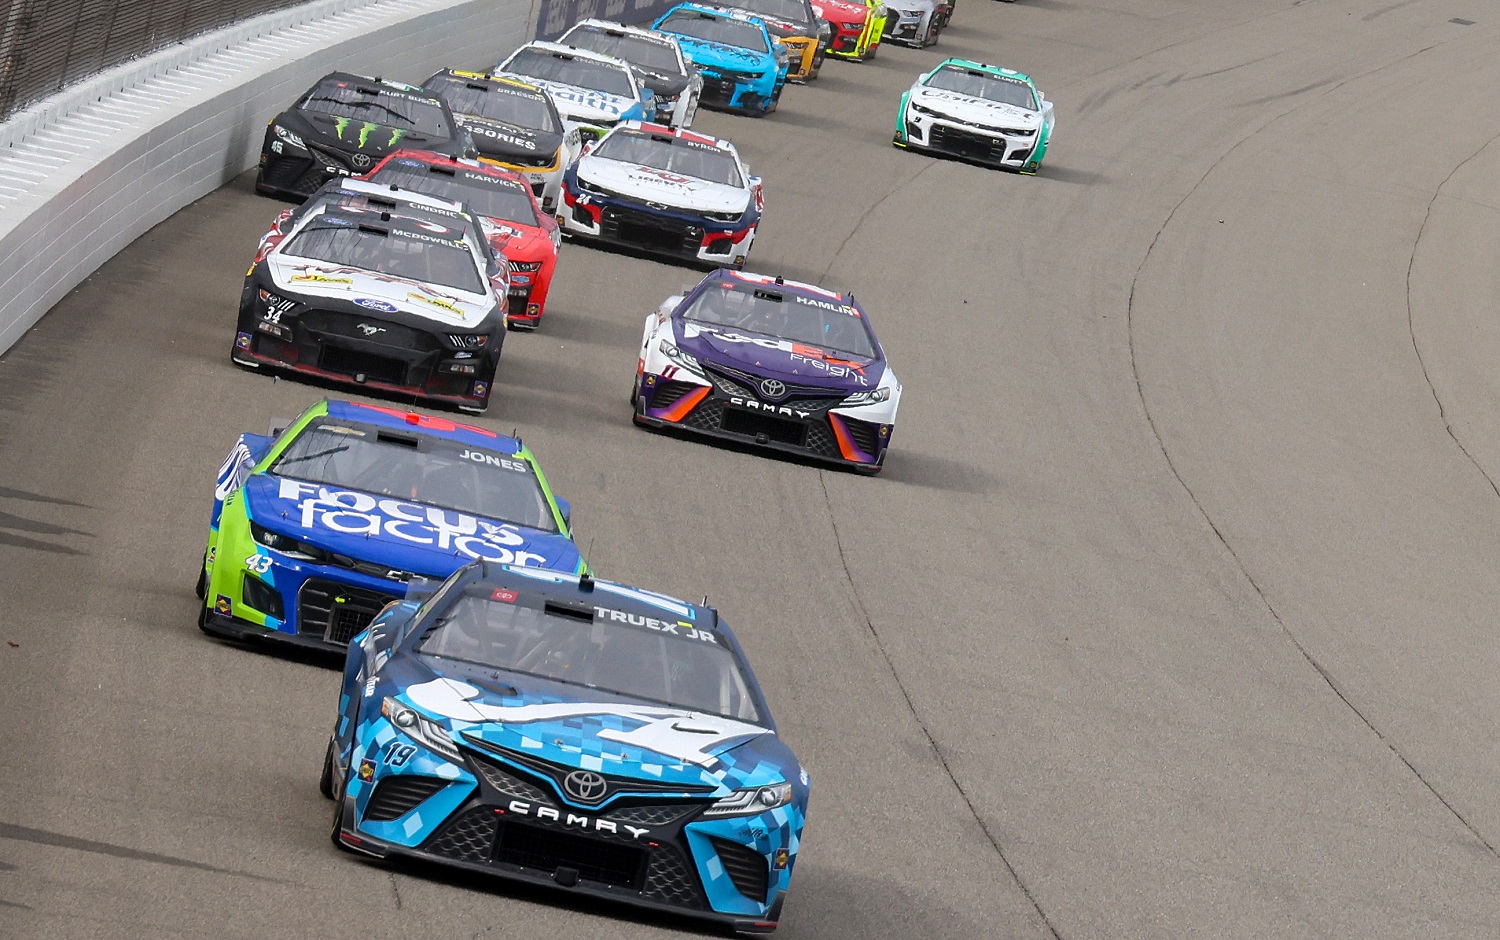 The Chicago Street race in July will be nothing like NASCAR Cup Series action on Michigan International Speedway or other ovals and road courses. | Mike Mulholland/Getty Images